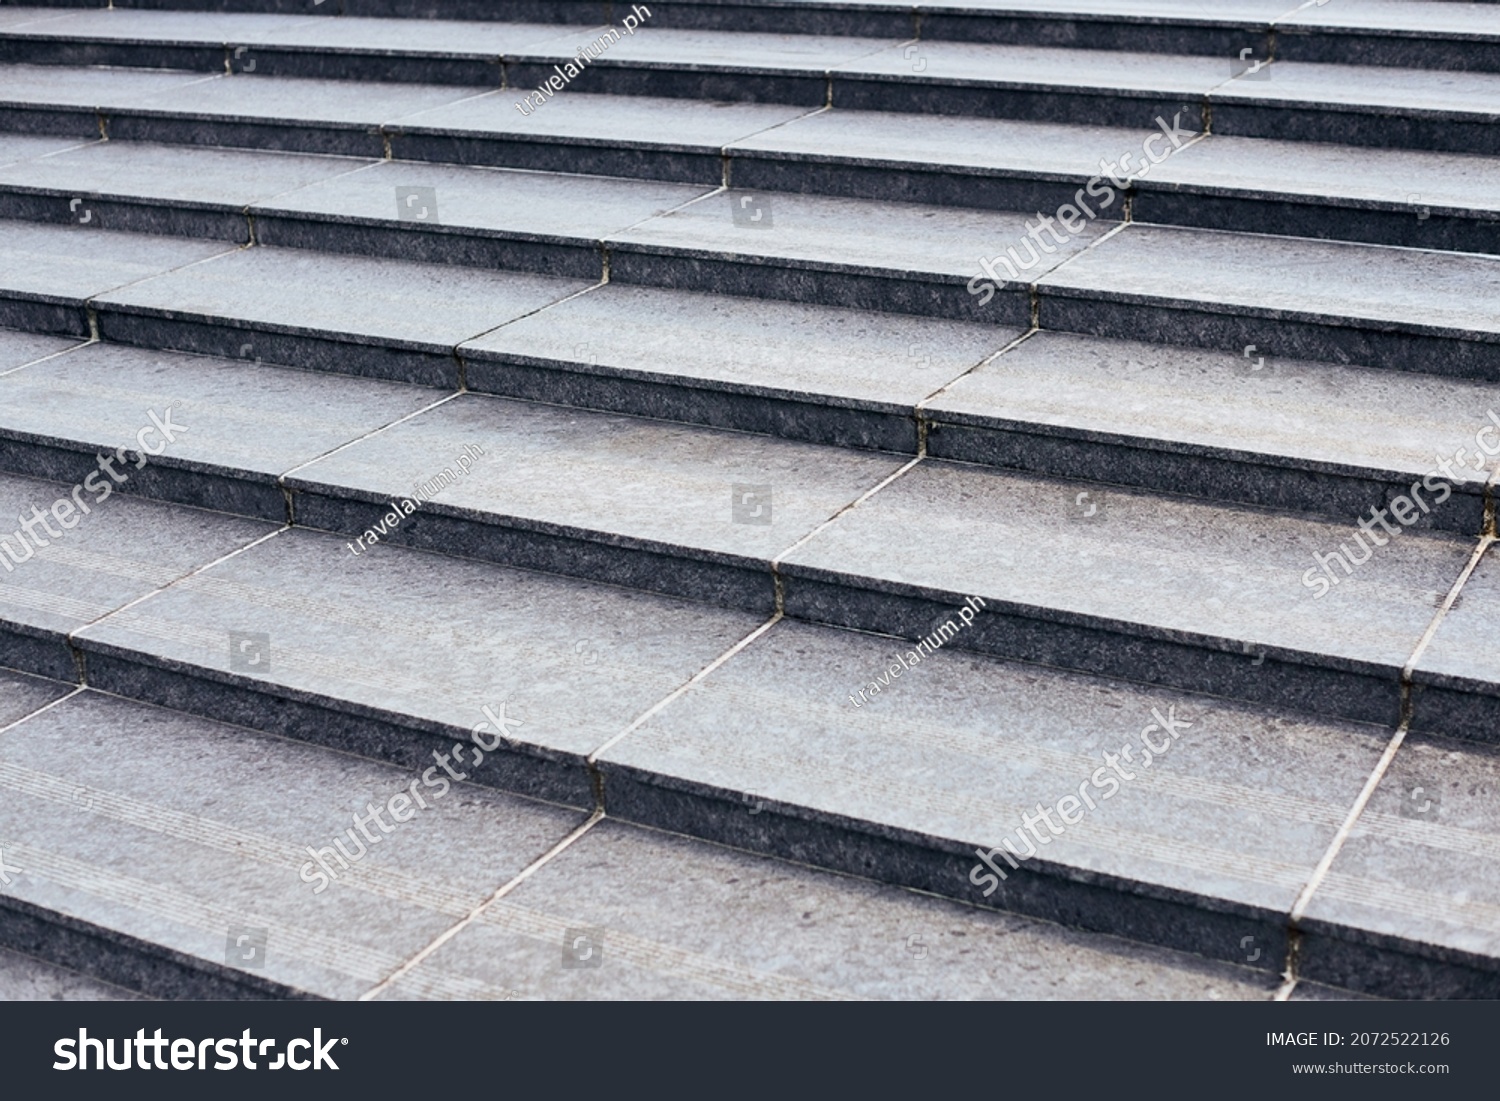 2,547 Granite tiles for stairs Images, Stock Photos & Vectors ...